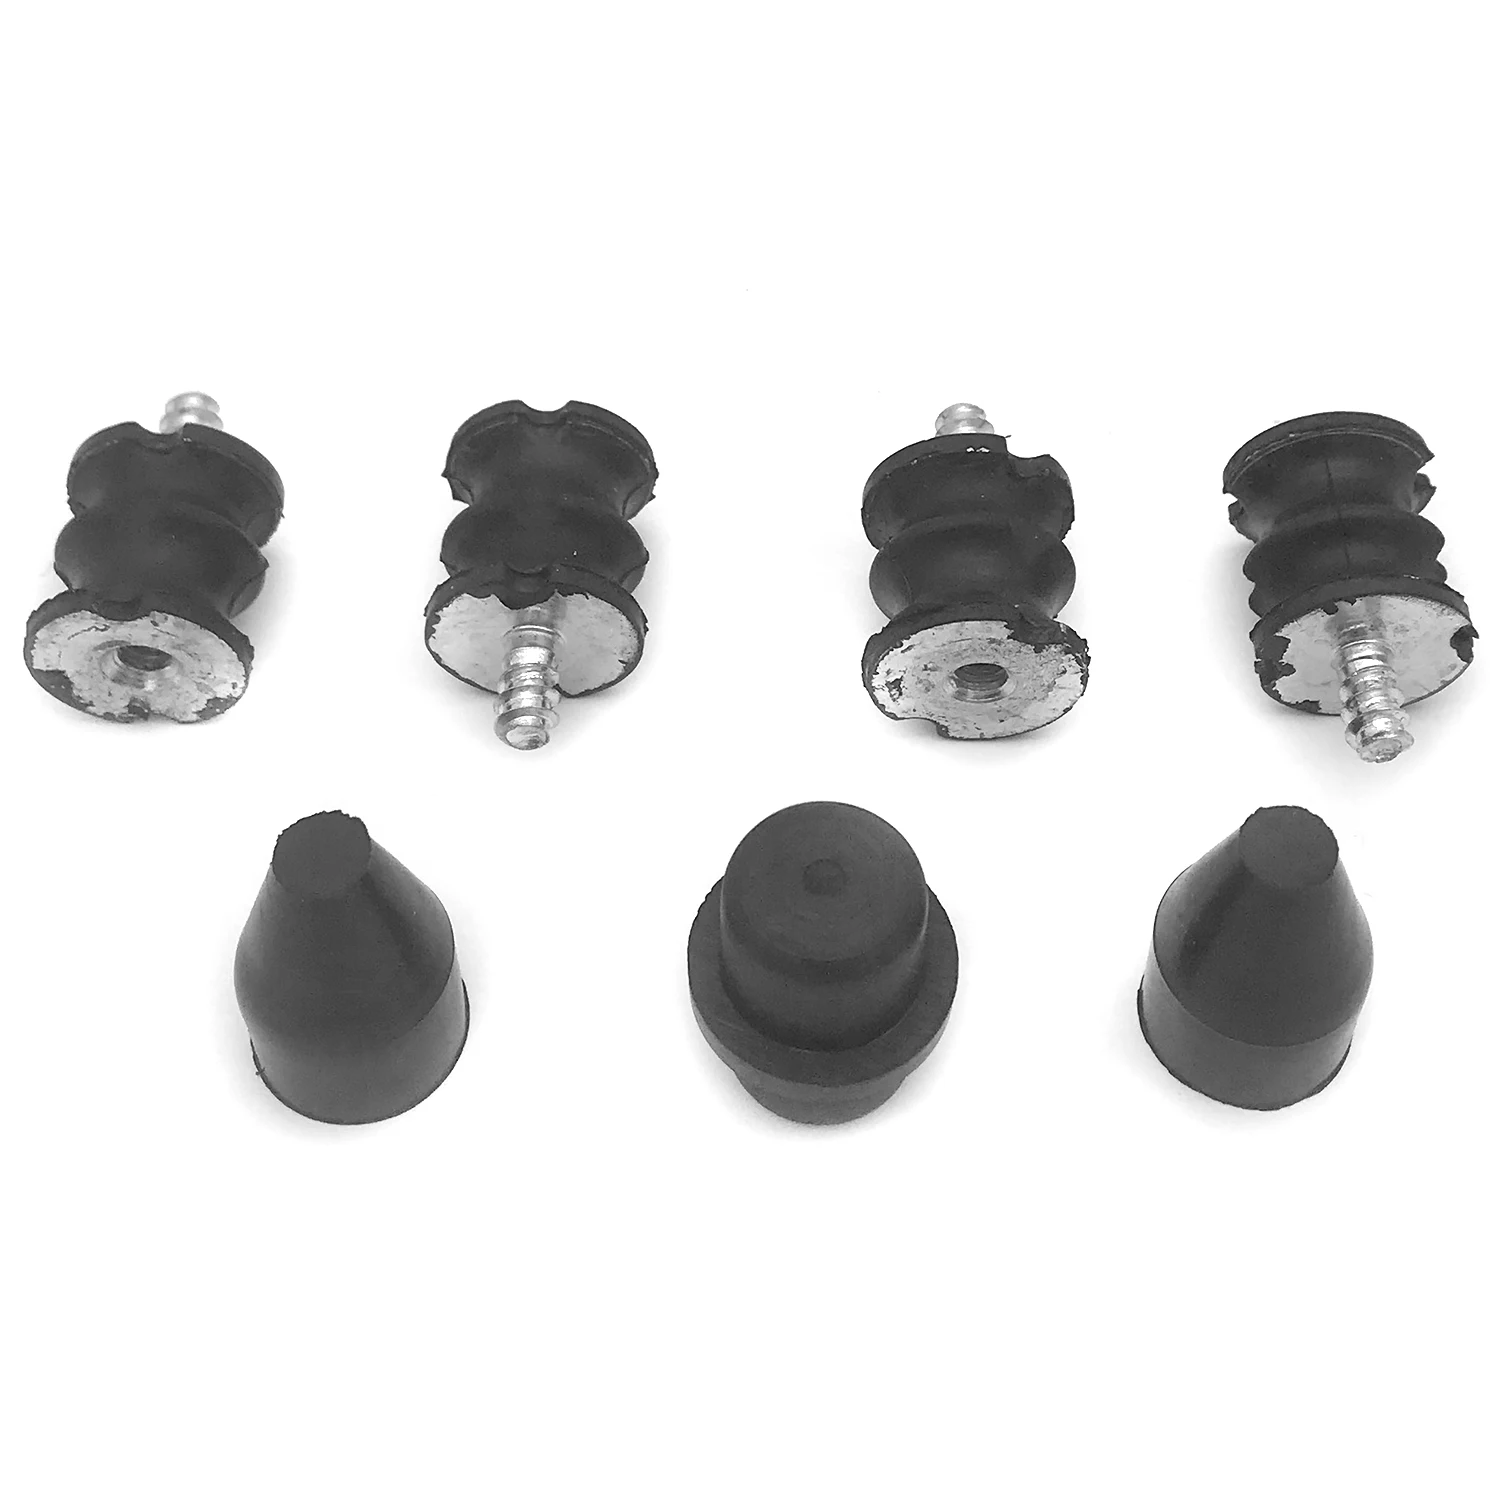 

7Pcs Rubber Front Handle Isolator Buffer Shock Mount elements Set Kit Fit for Husqvarna 136 137 141 142 Chainsaw Parts